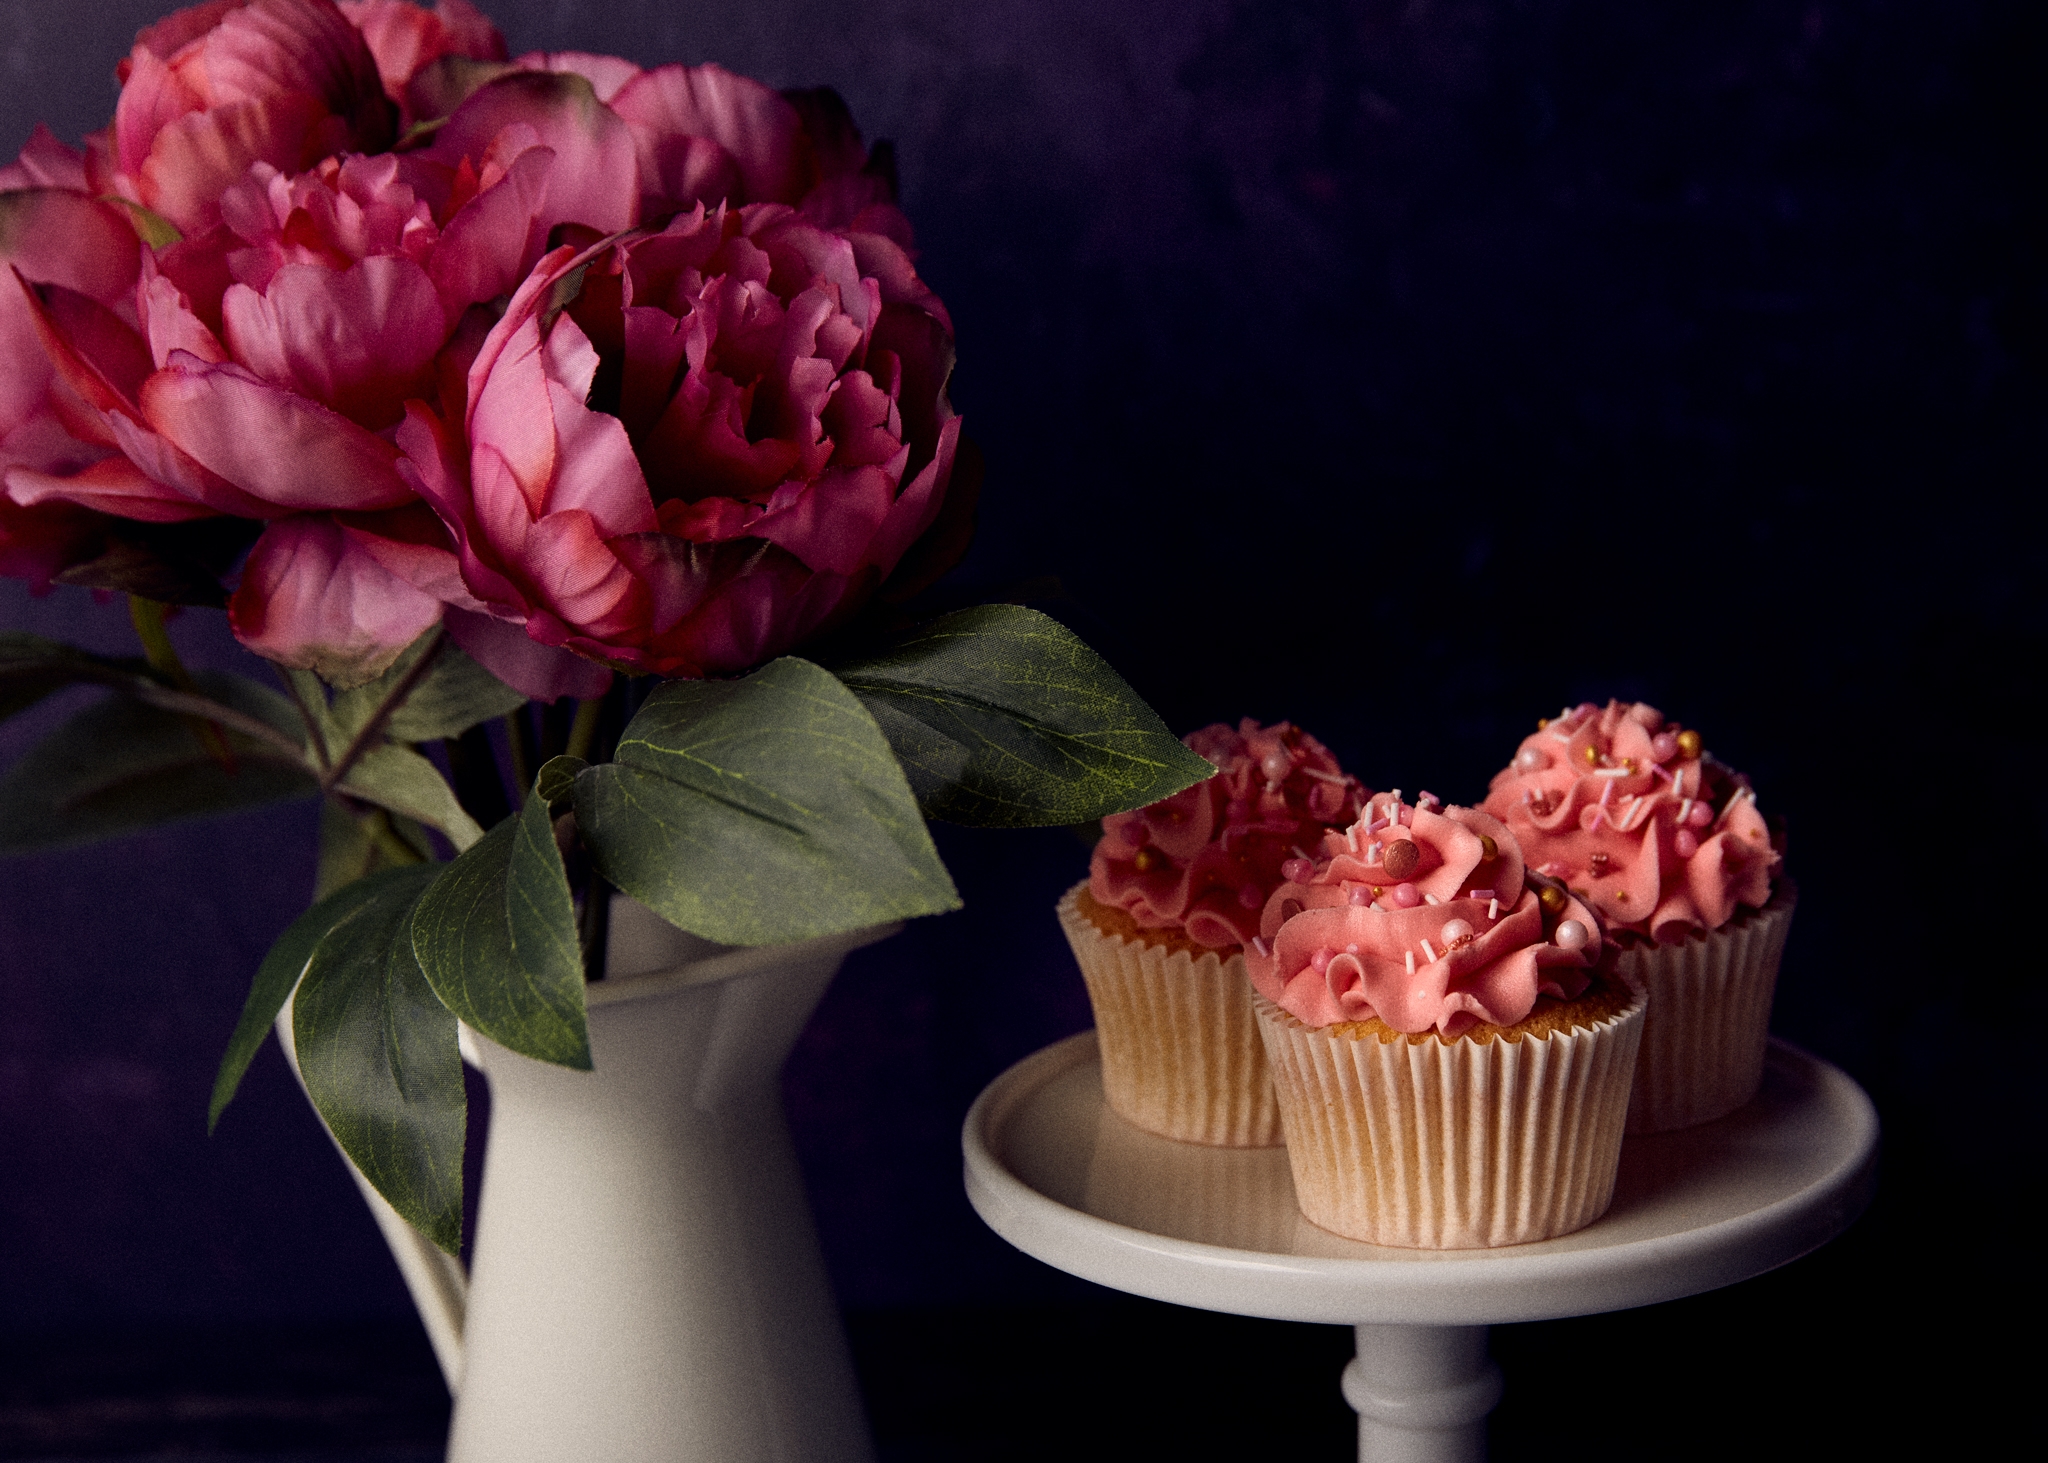 perfect product photos, cupcakes with pink frosting placed on a table alongside a vase full of pink roses